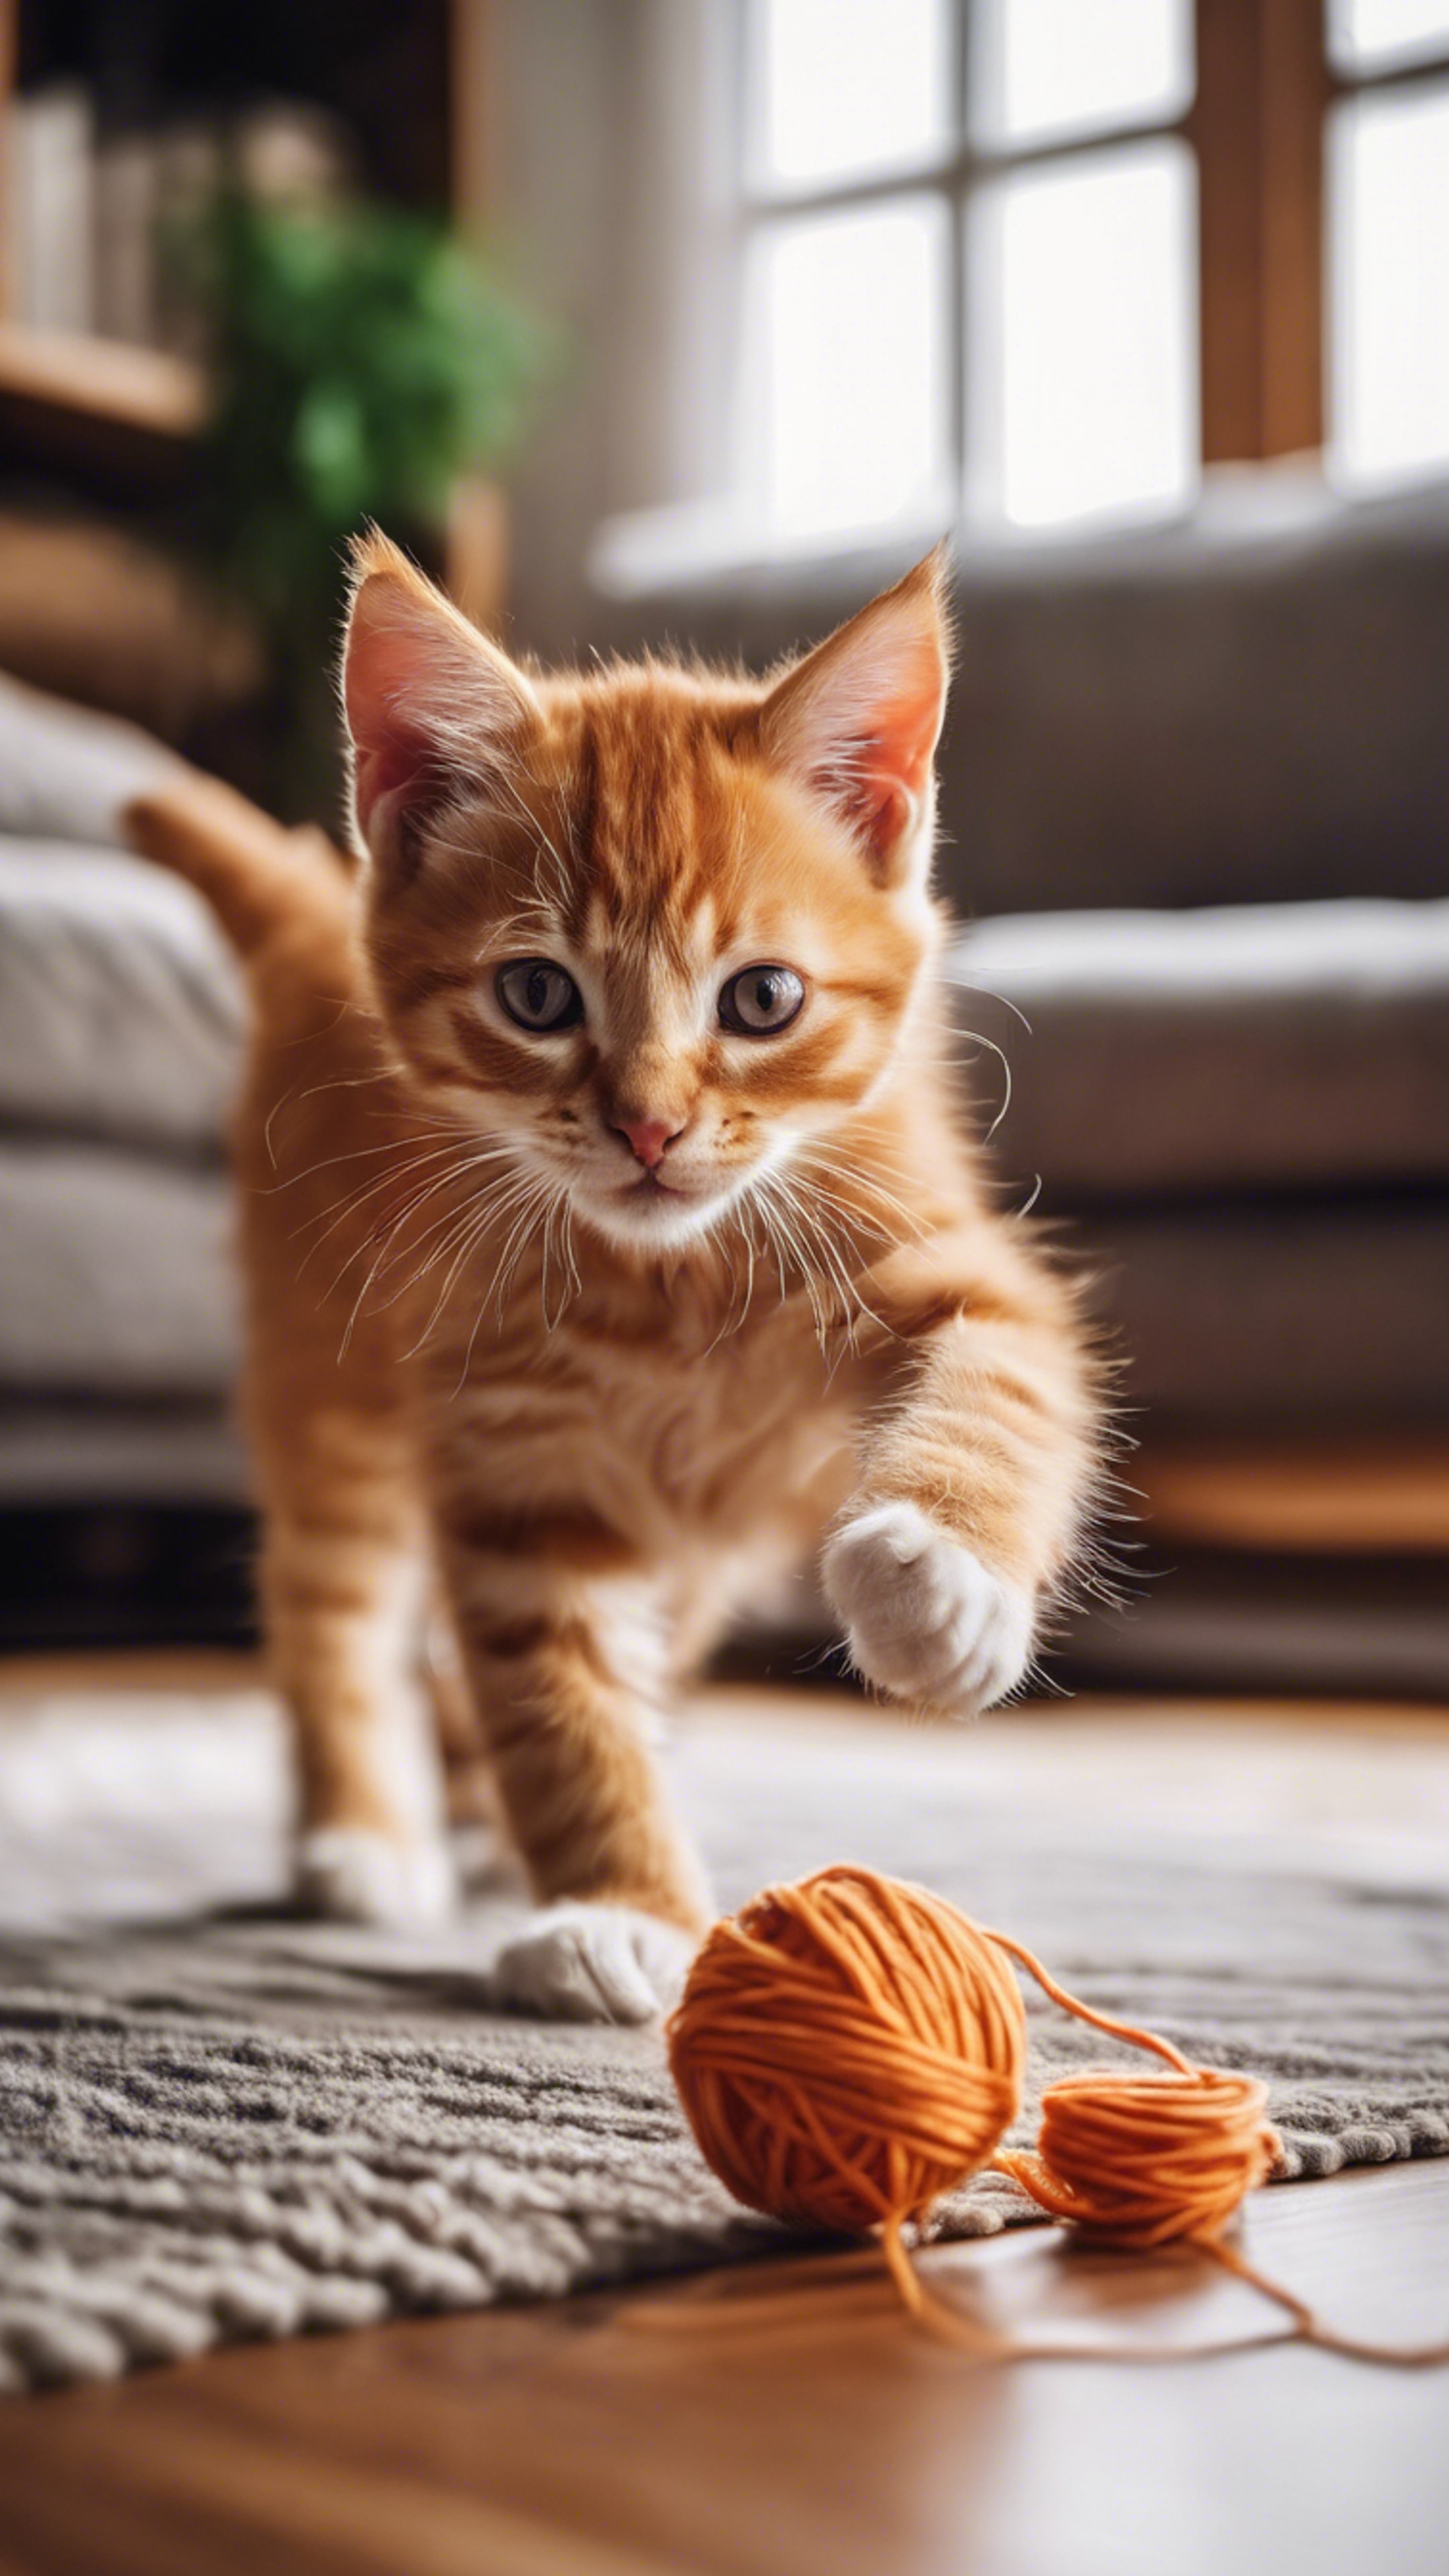 A playful orange tabby kitten, chasing a ball of yarn in a cozy wooden living room. Tapet[48ba56b3f1554d3caaed]